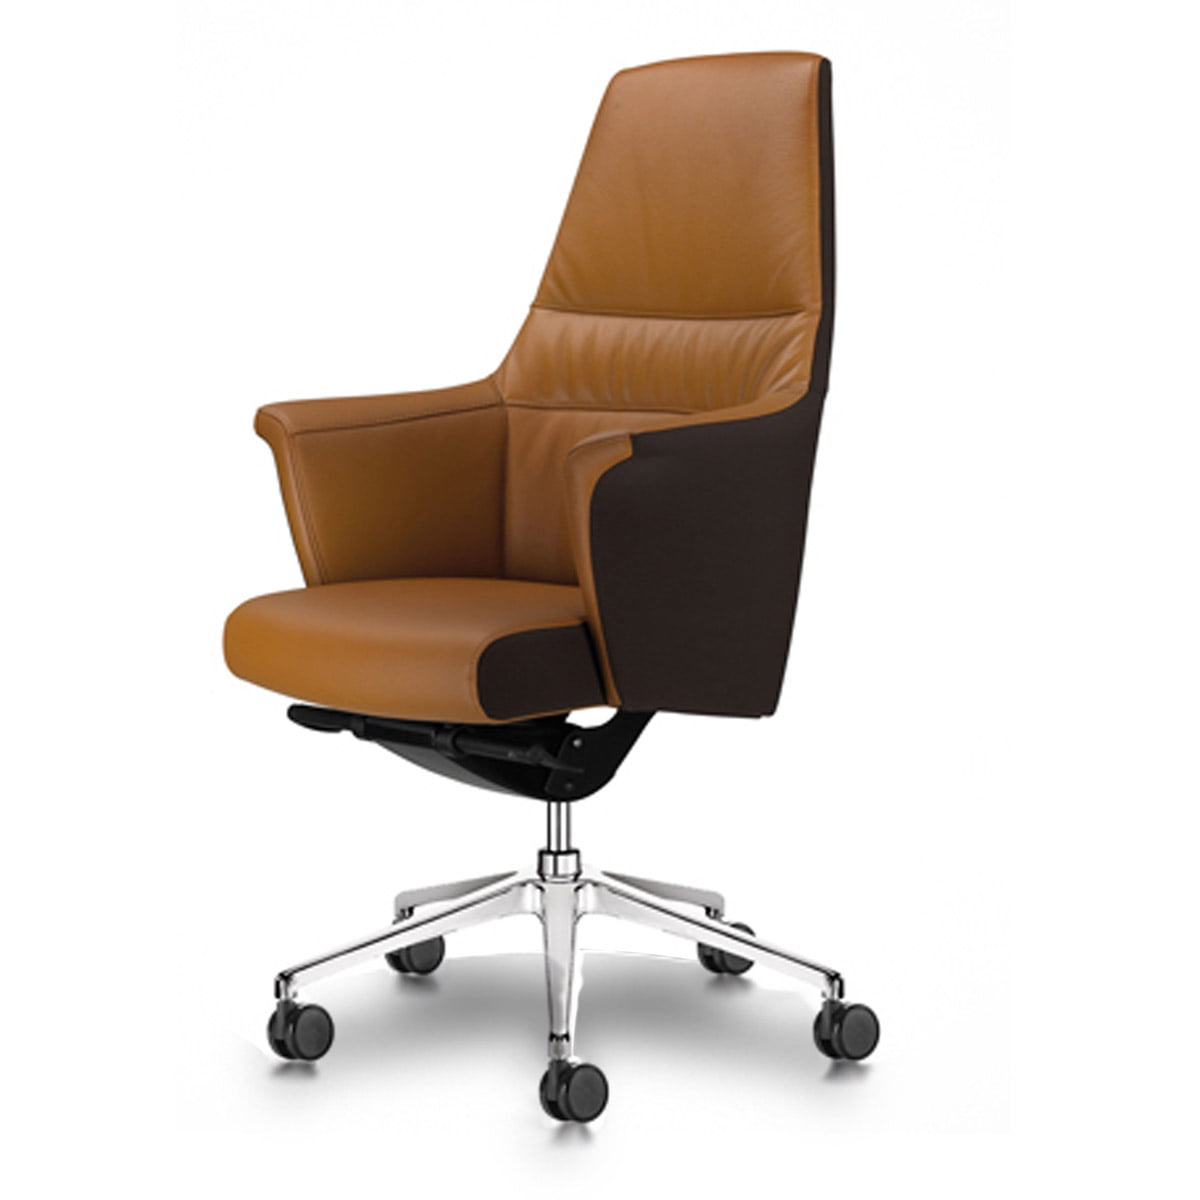 2 leathers chair for an office meeting room